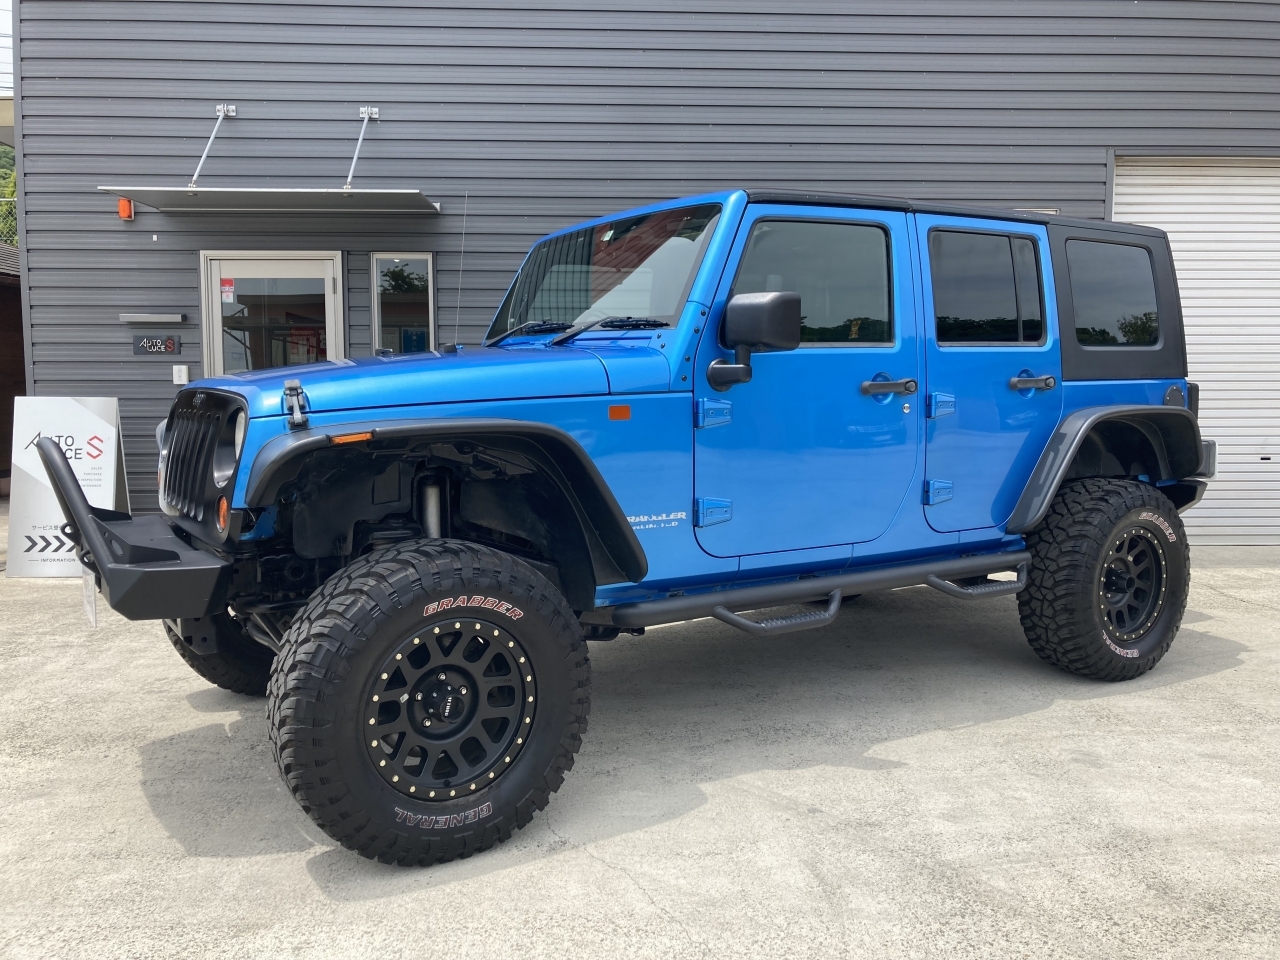 JEEP WRANGLER UNLIMITED 2010